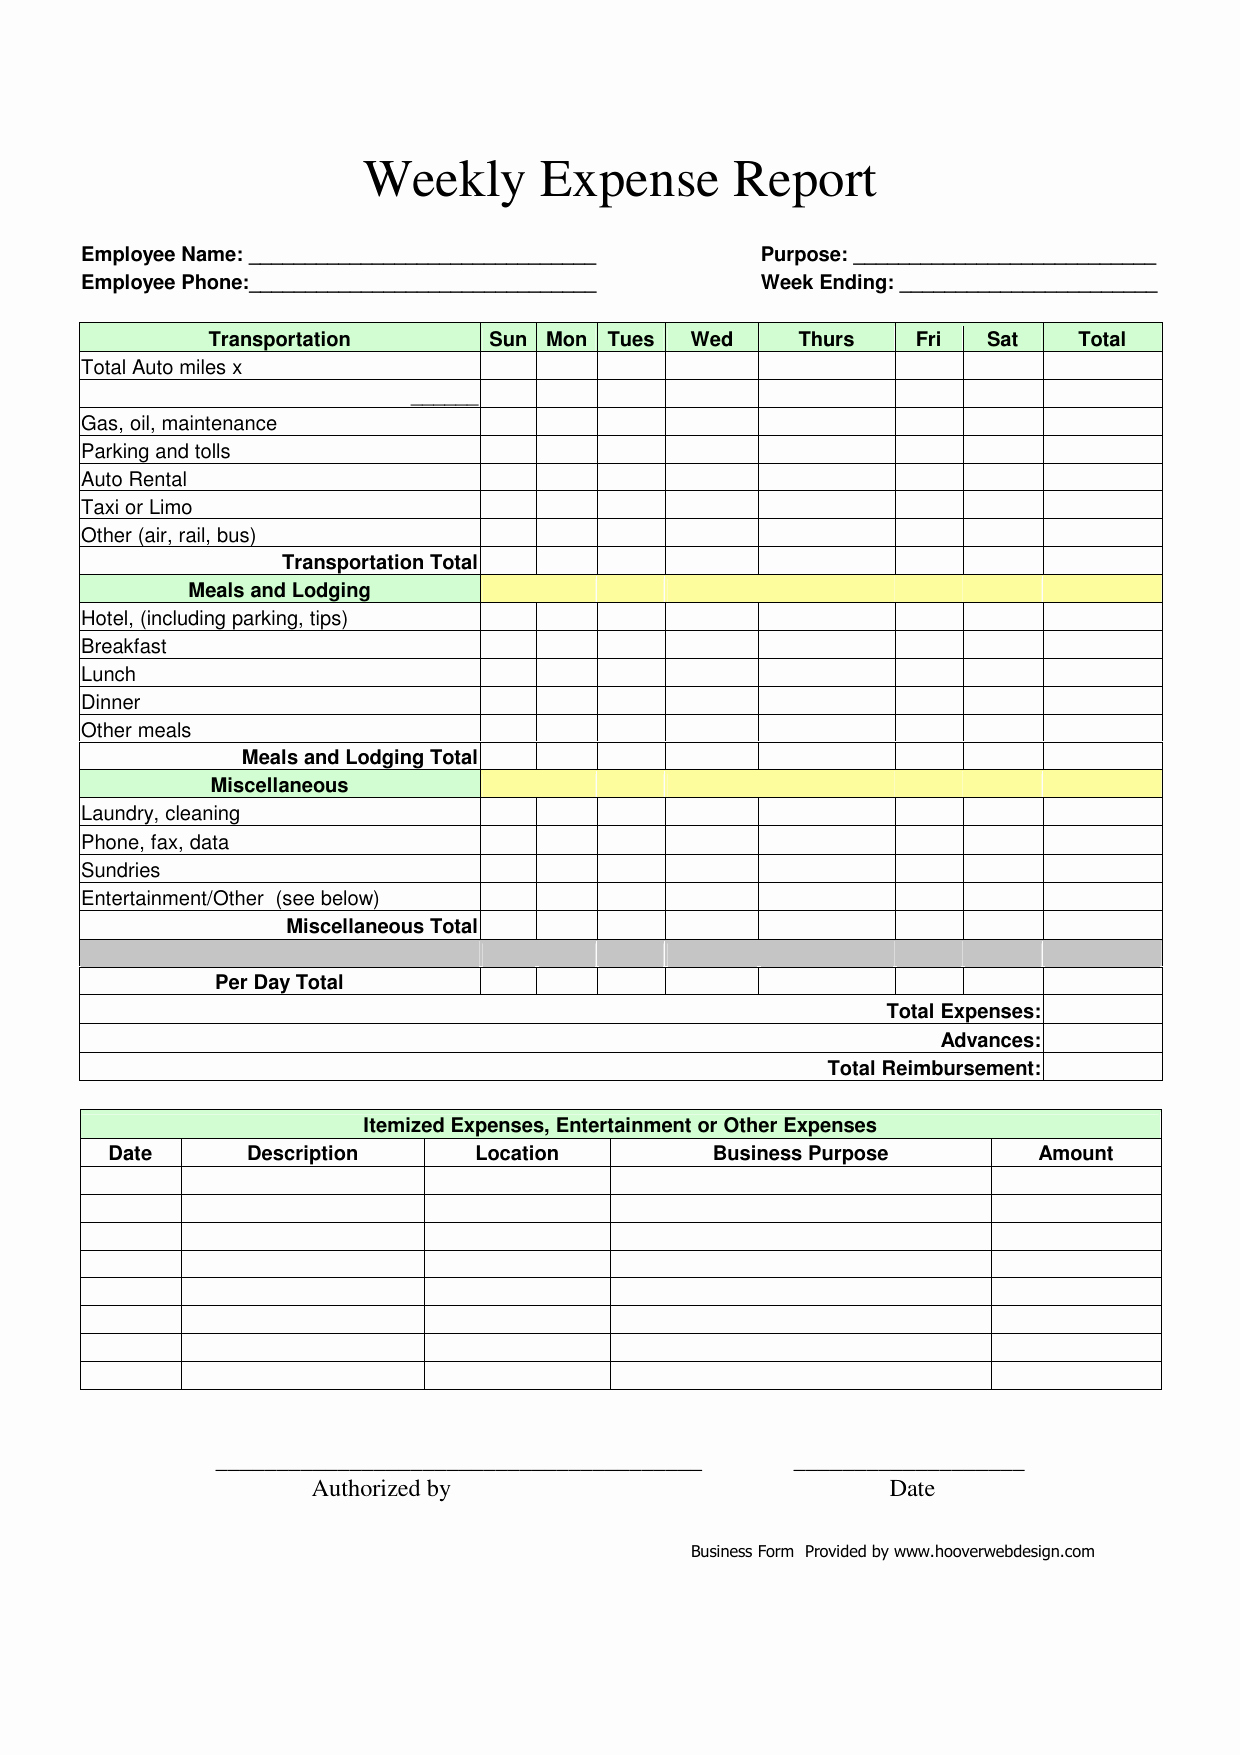 How to Log Business Expenses New Download Weekly Expense Report form Pdf